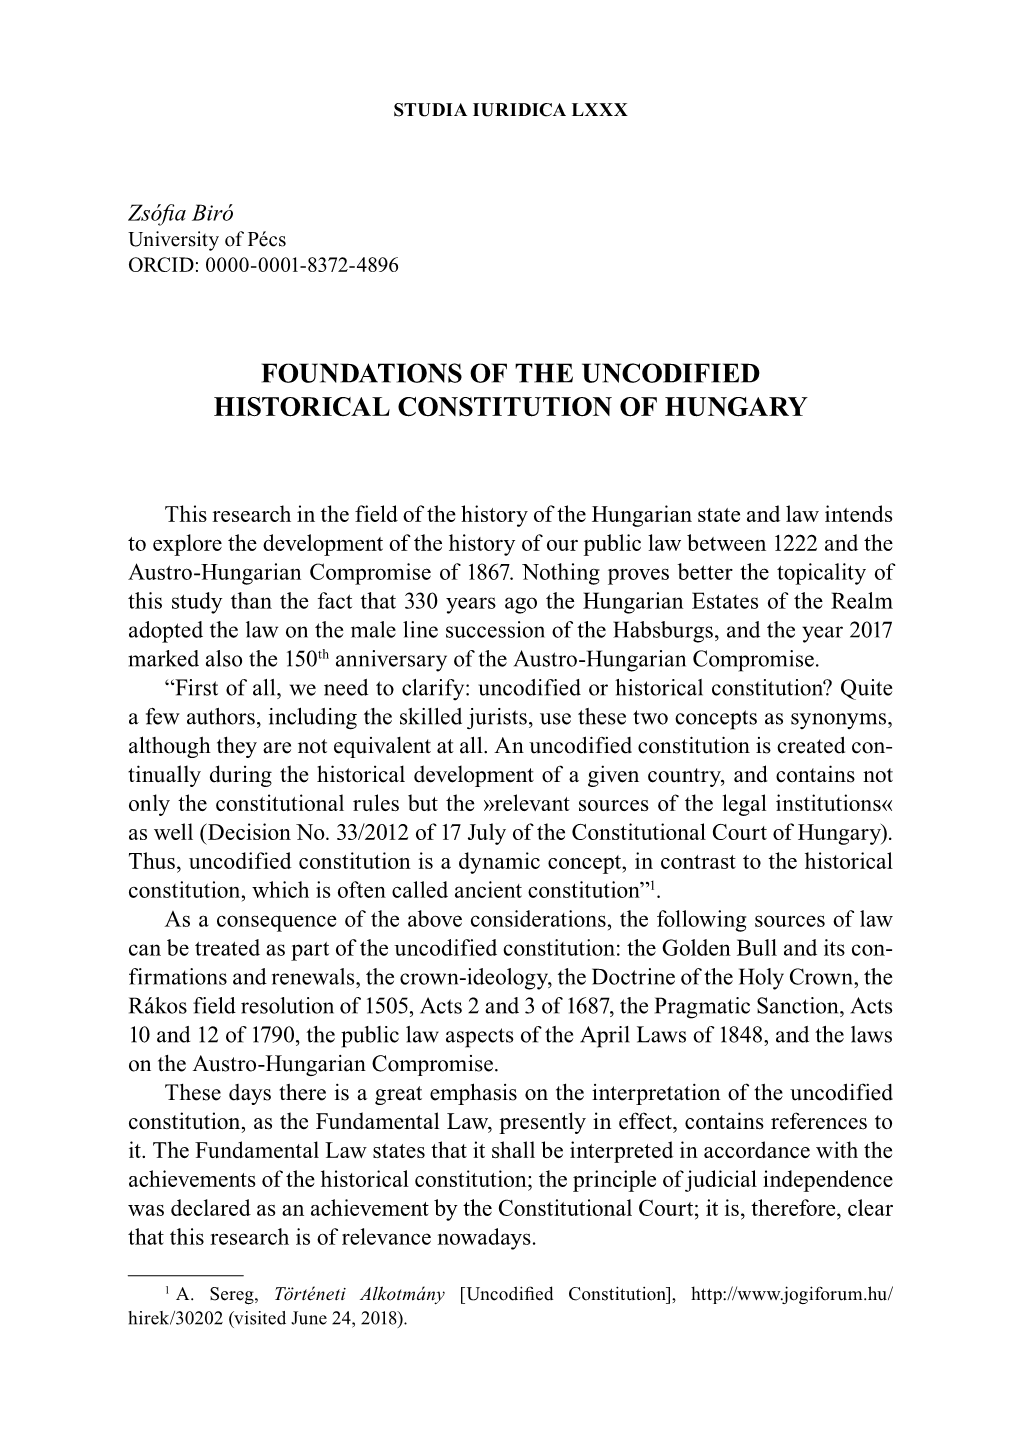 Foundations of the Uncodified Historical Constitution of Hungary